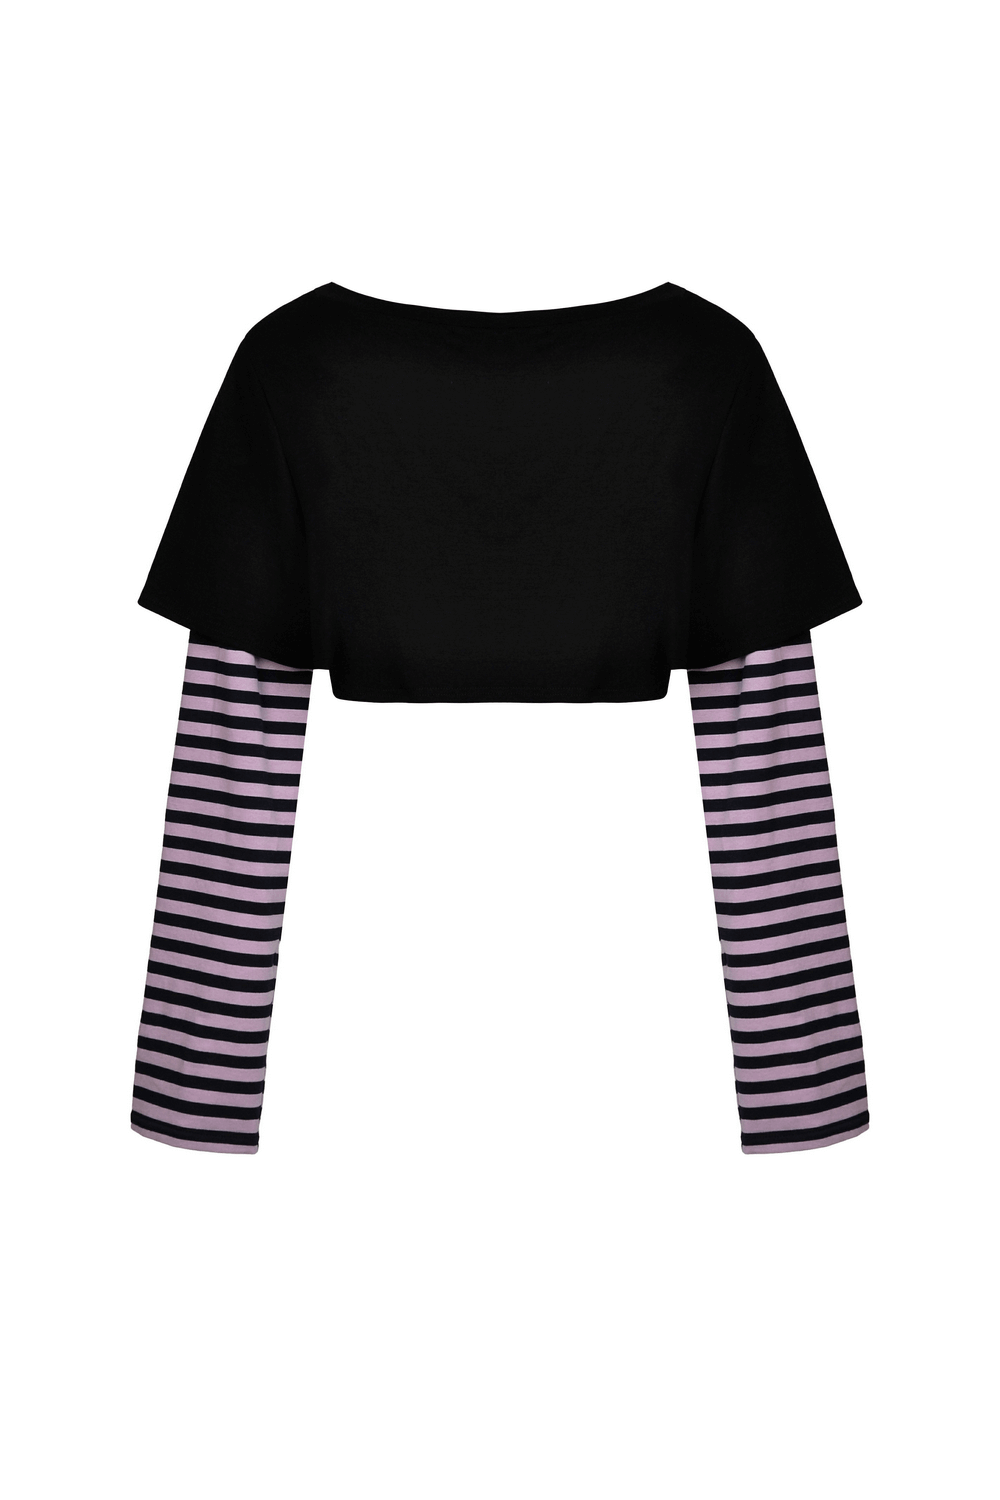 Goth Punk Crop Top with Cheshire Cat Graphic and Striped Arms